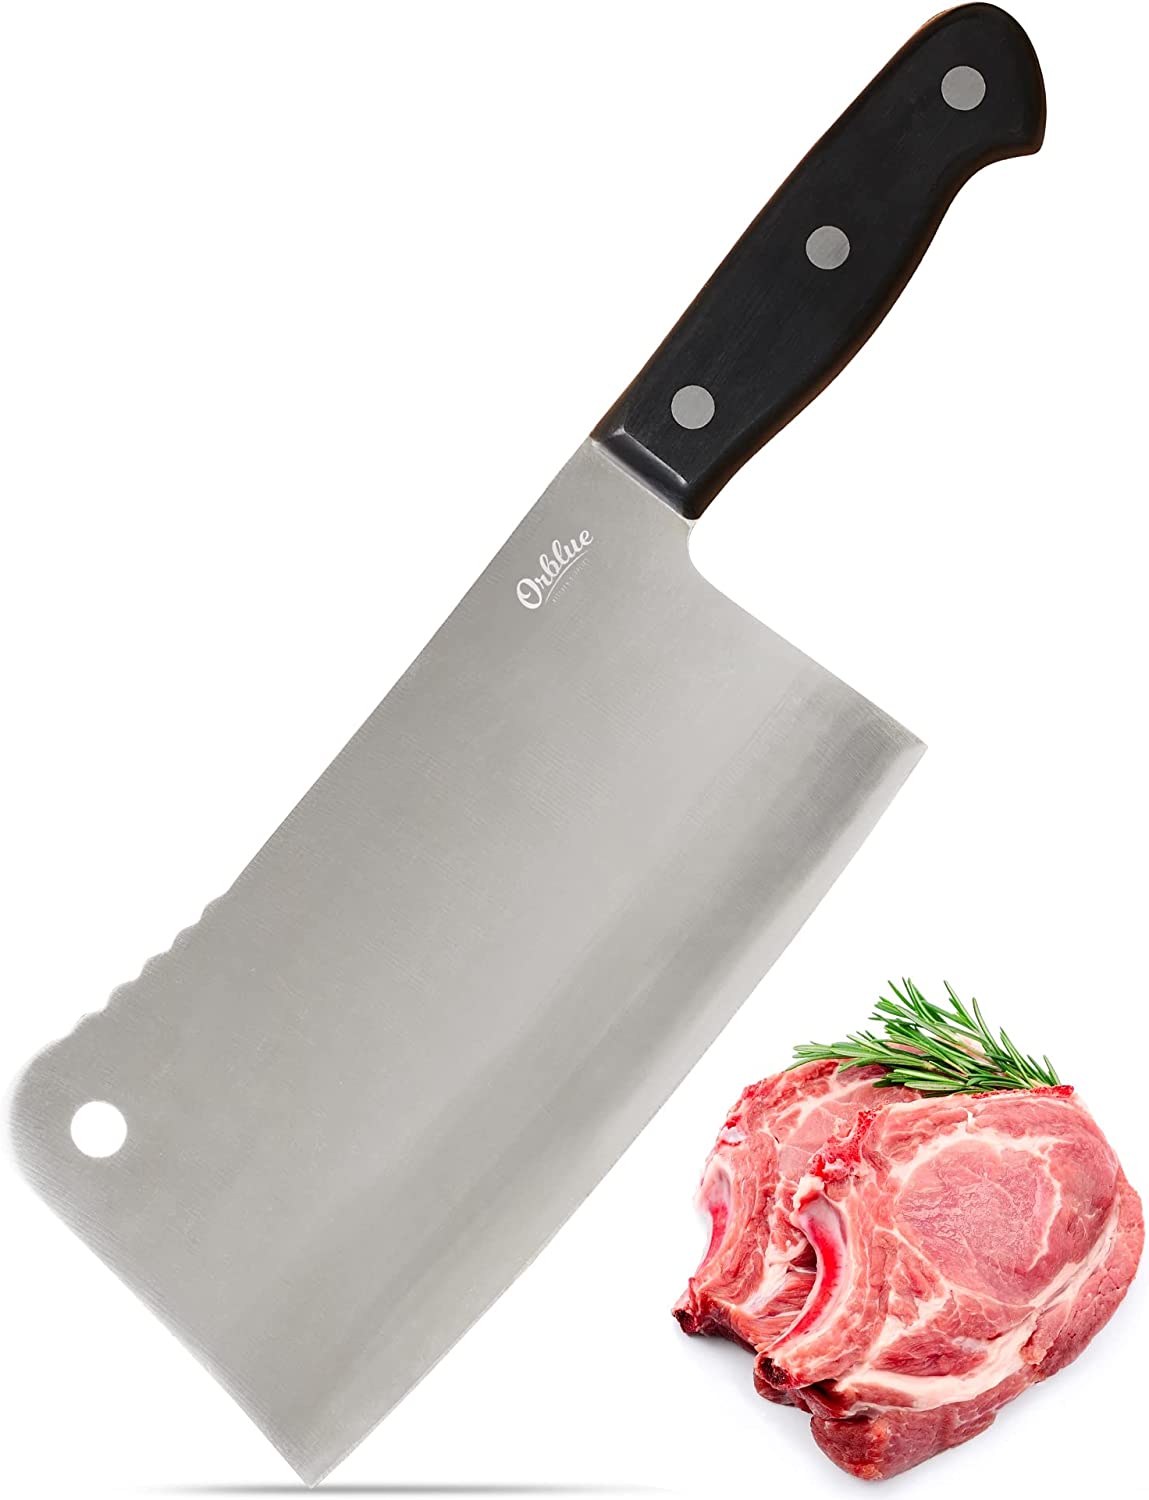 Orblue Ergonomic Easy Clean Meat Cleaver